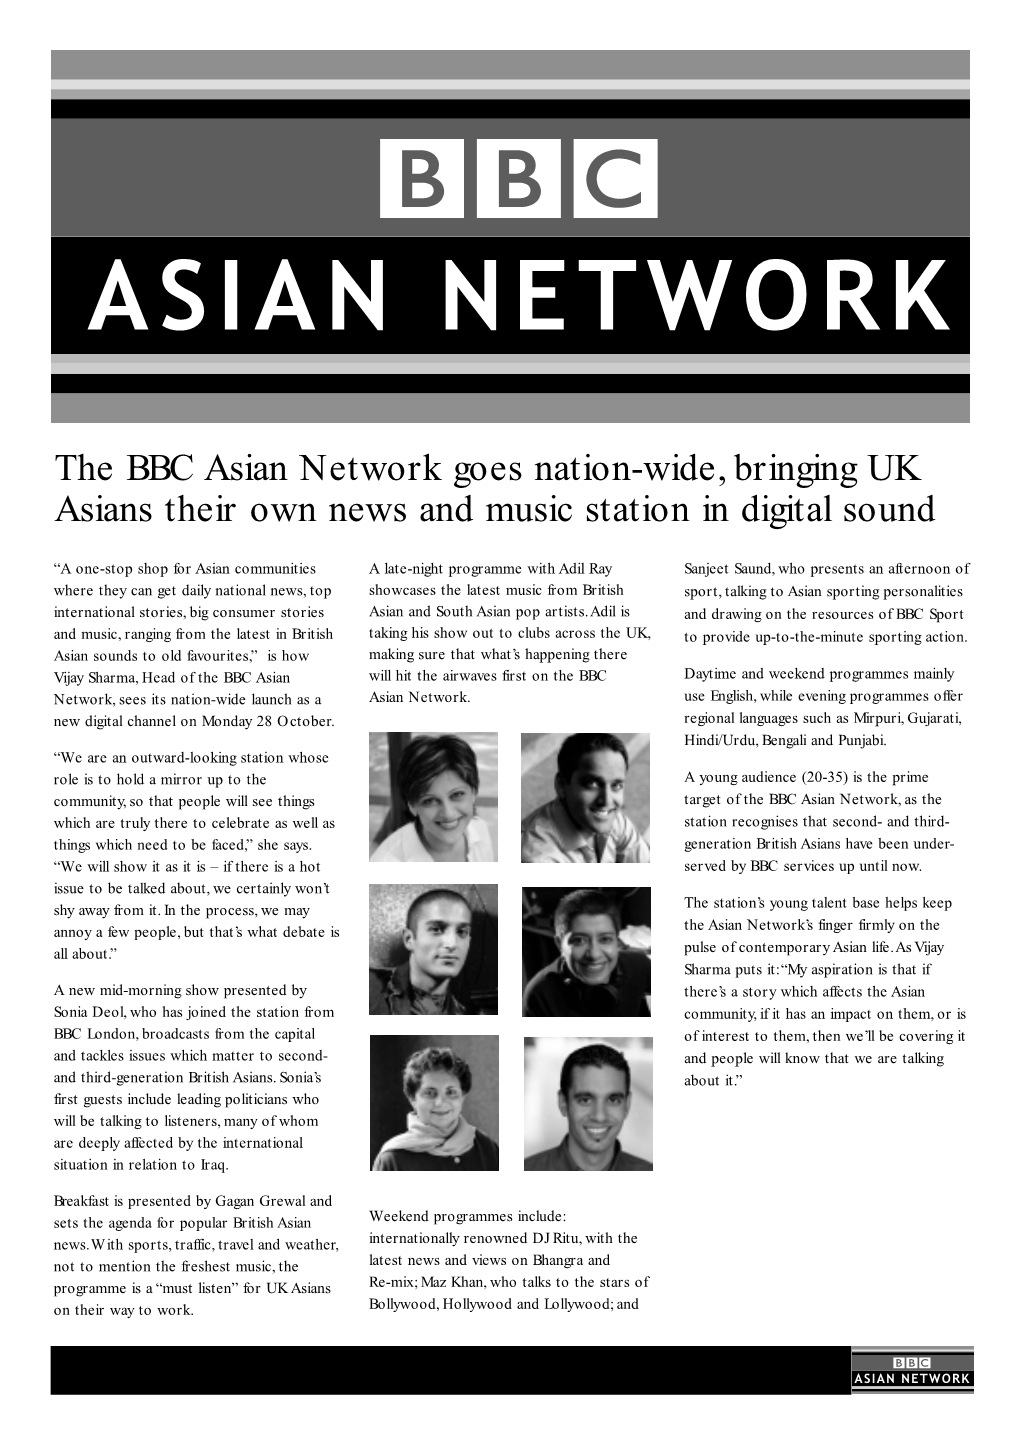 The BBC Asian Network Goes Nation-Wide, Bringing UK Asians Their Own News and Music Station in Digital Sound